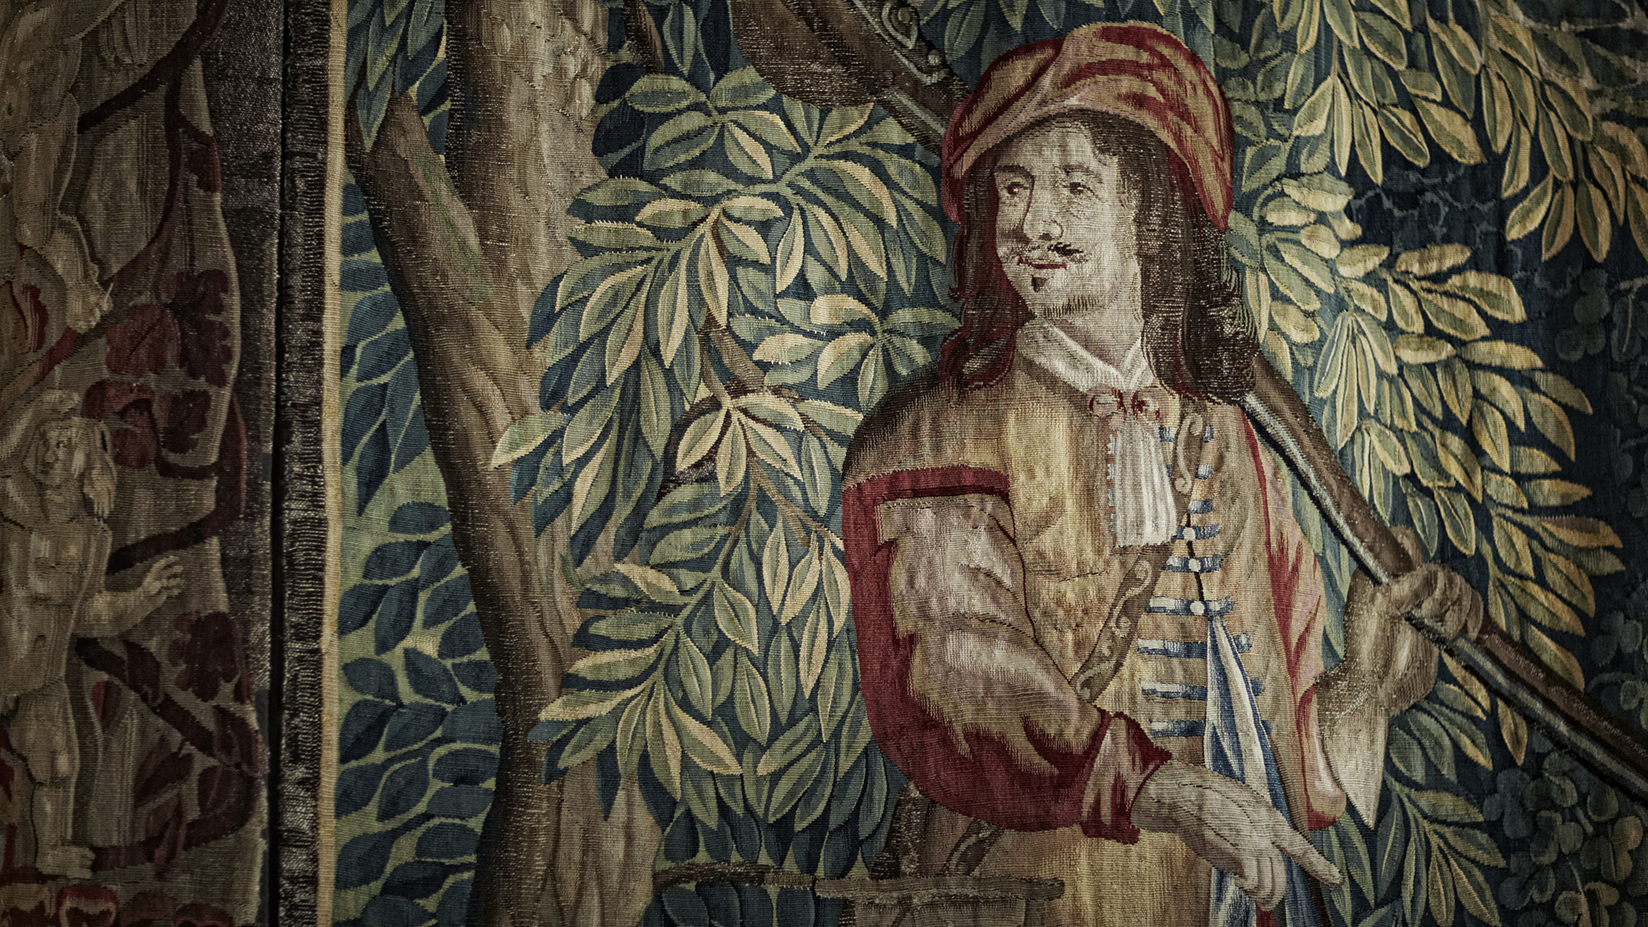 Detail of a tapestry showing a man in front of a tree.